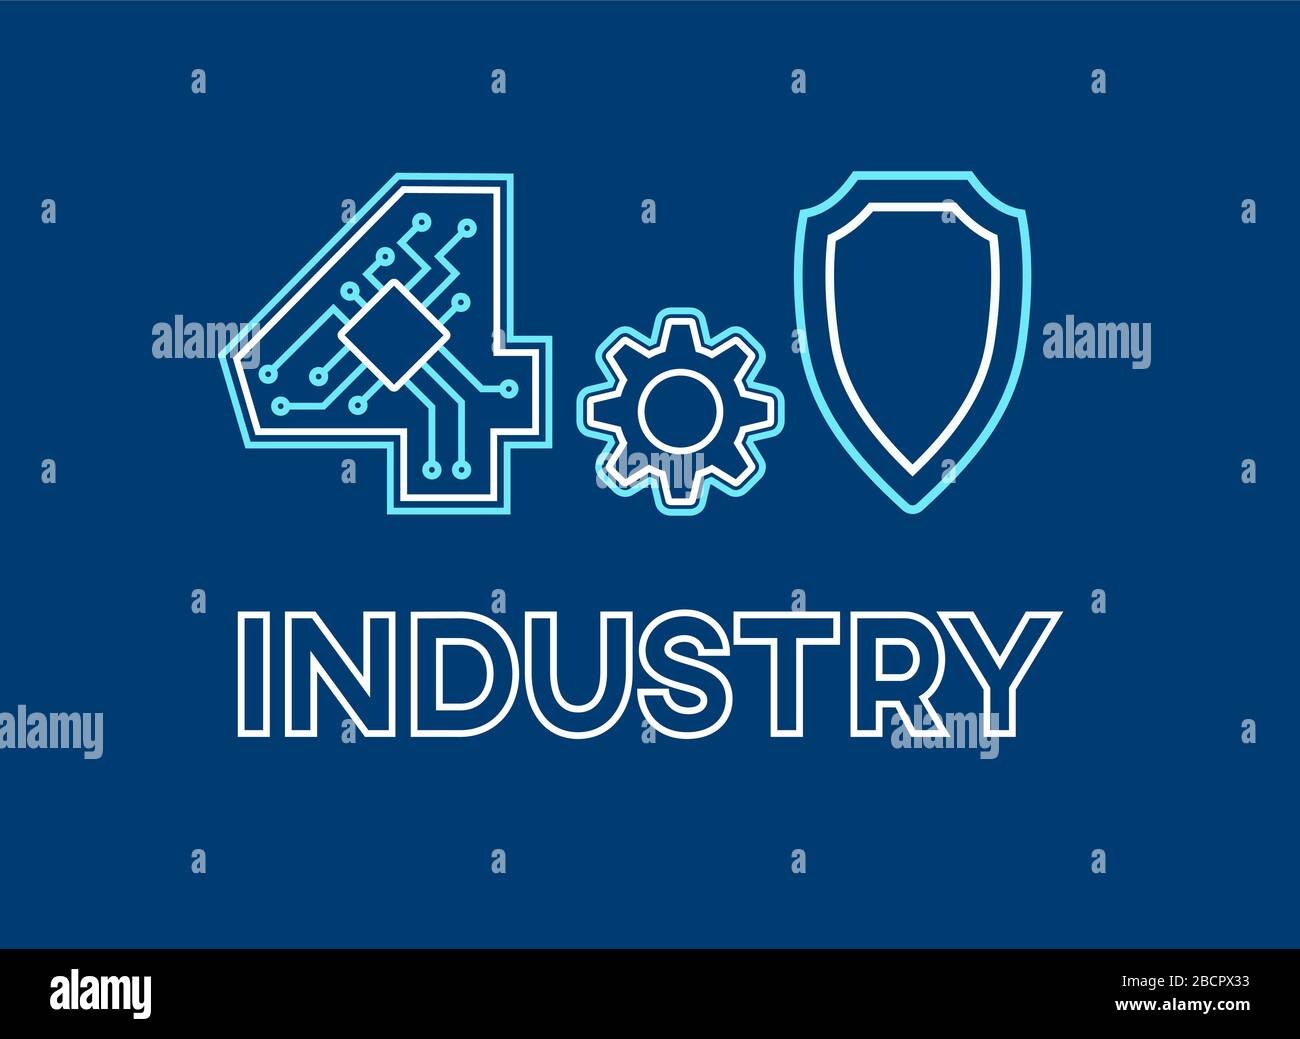 Modern industrial manufacturing concept Industry 4.0. Safety Automation Smart Machine technology. Stock Vector